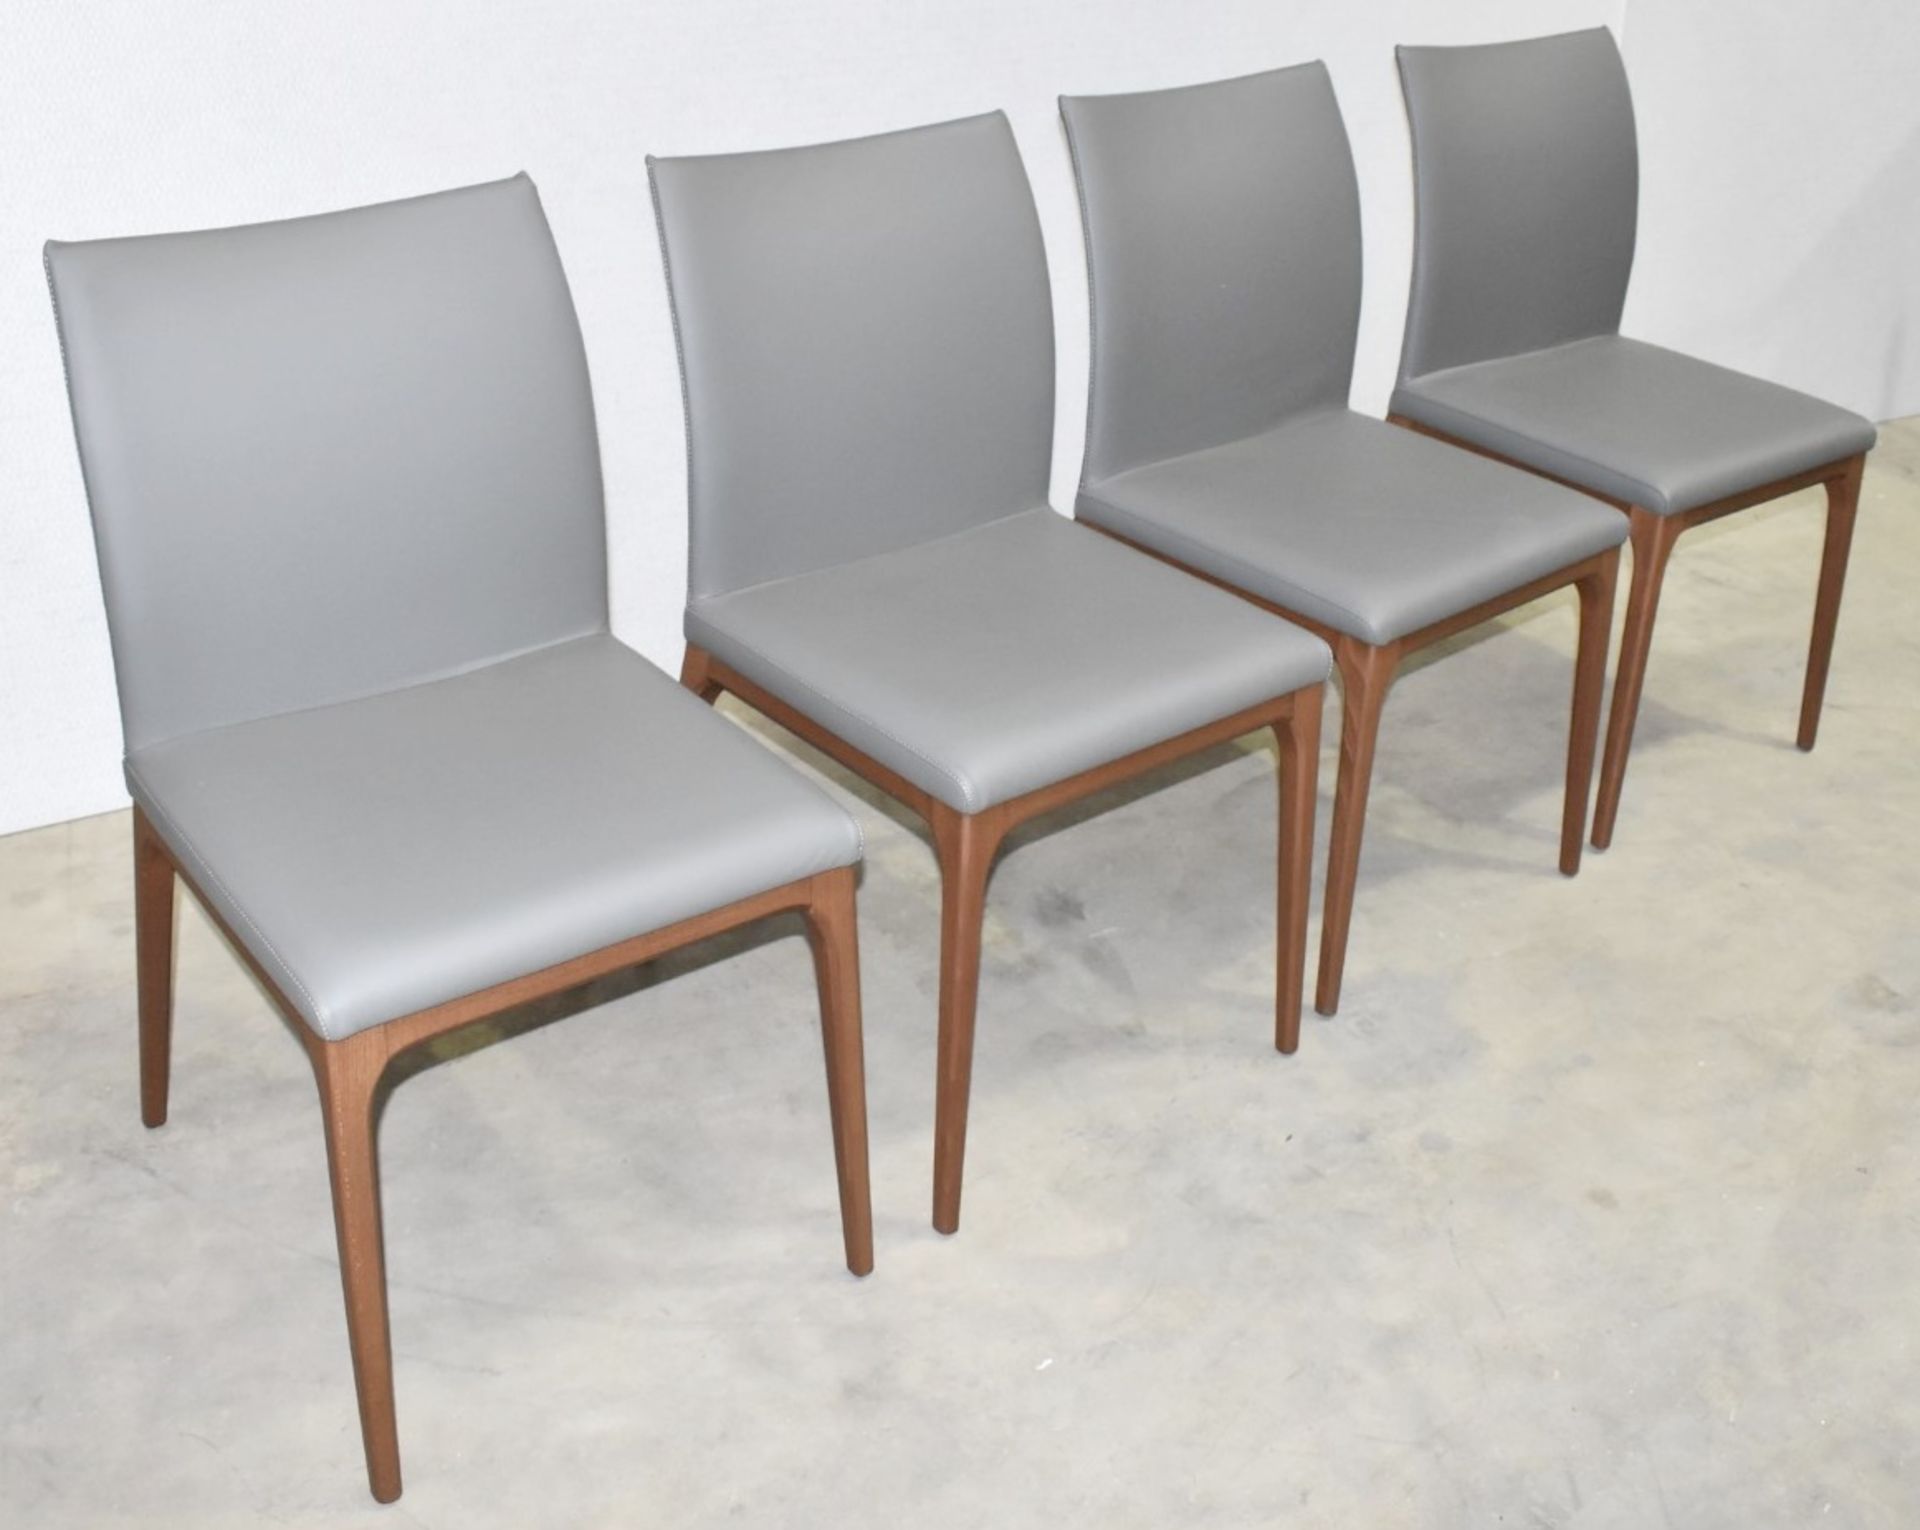 4 x CATTELAN ITALIA 'Arcadia Couture' Leather Upholstered Dining Chairs - Total Original RRP £3,540 - Image 2 of 19